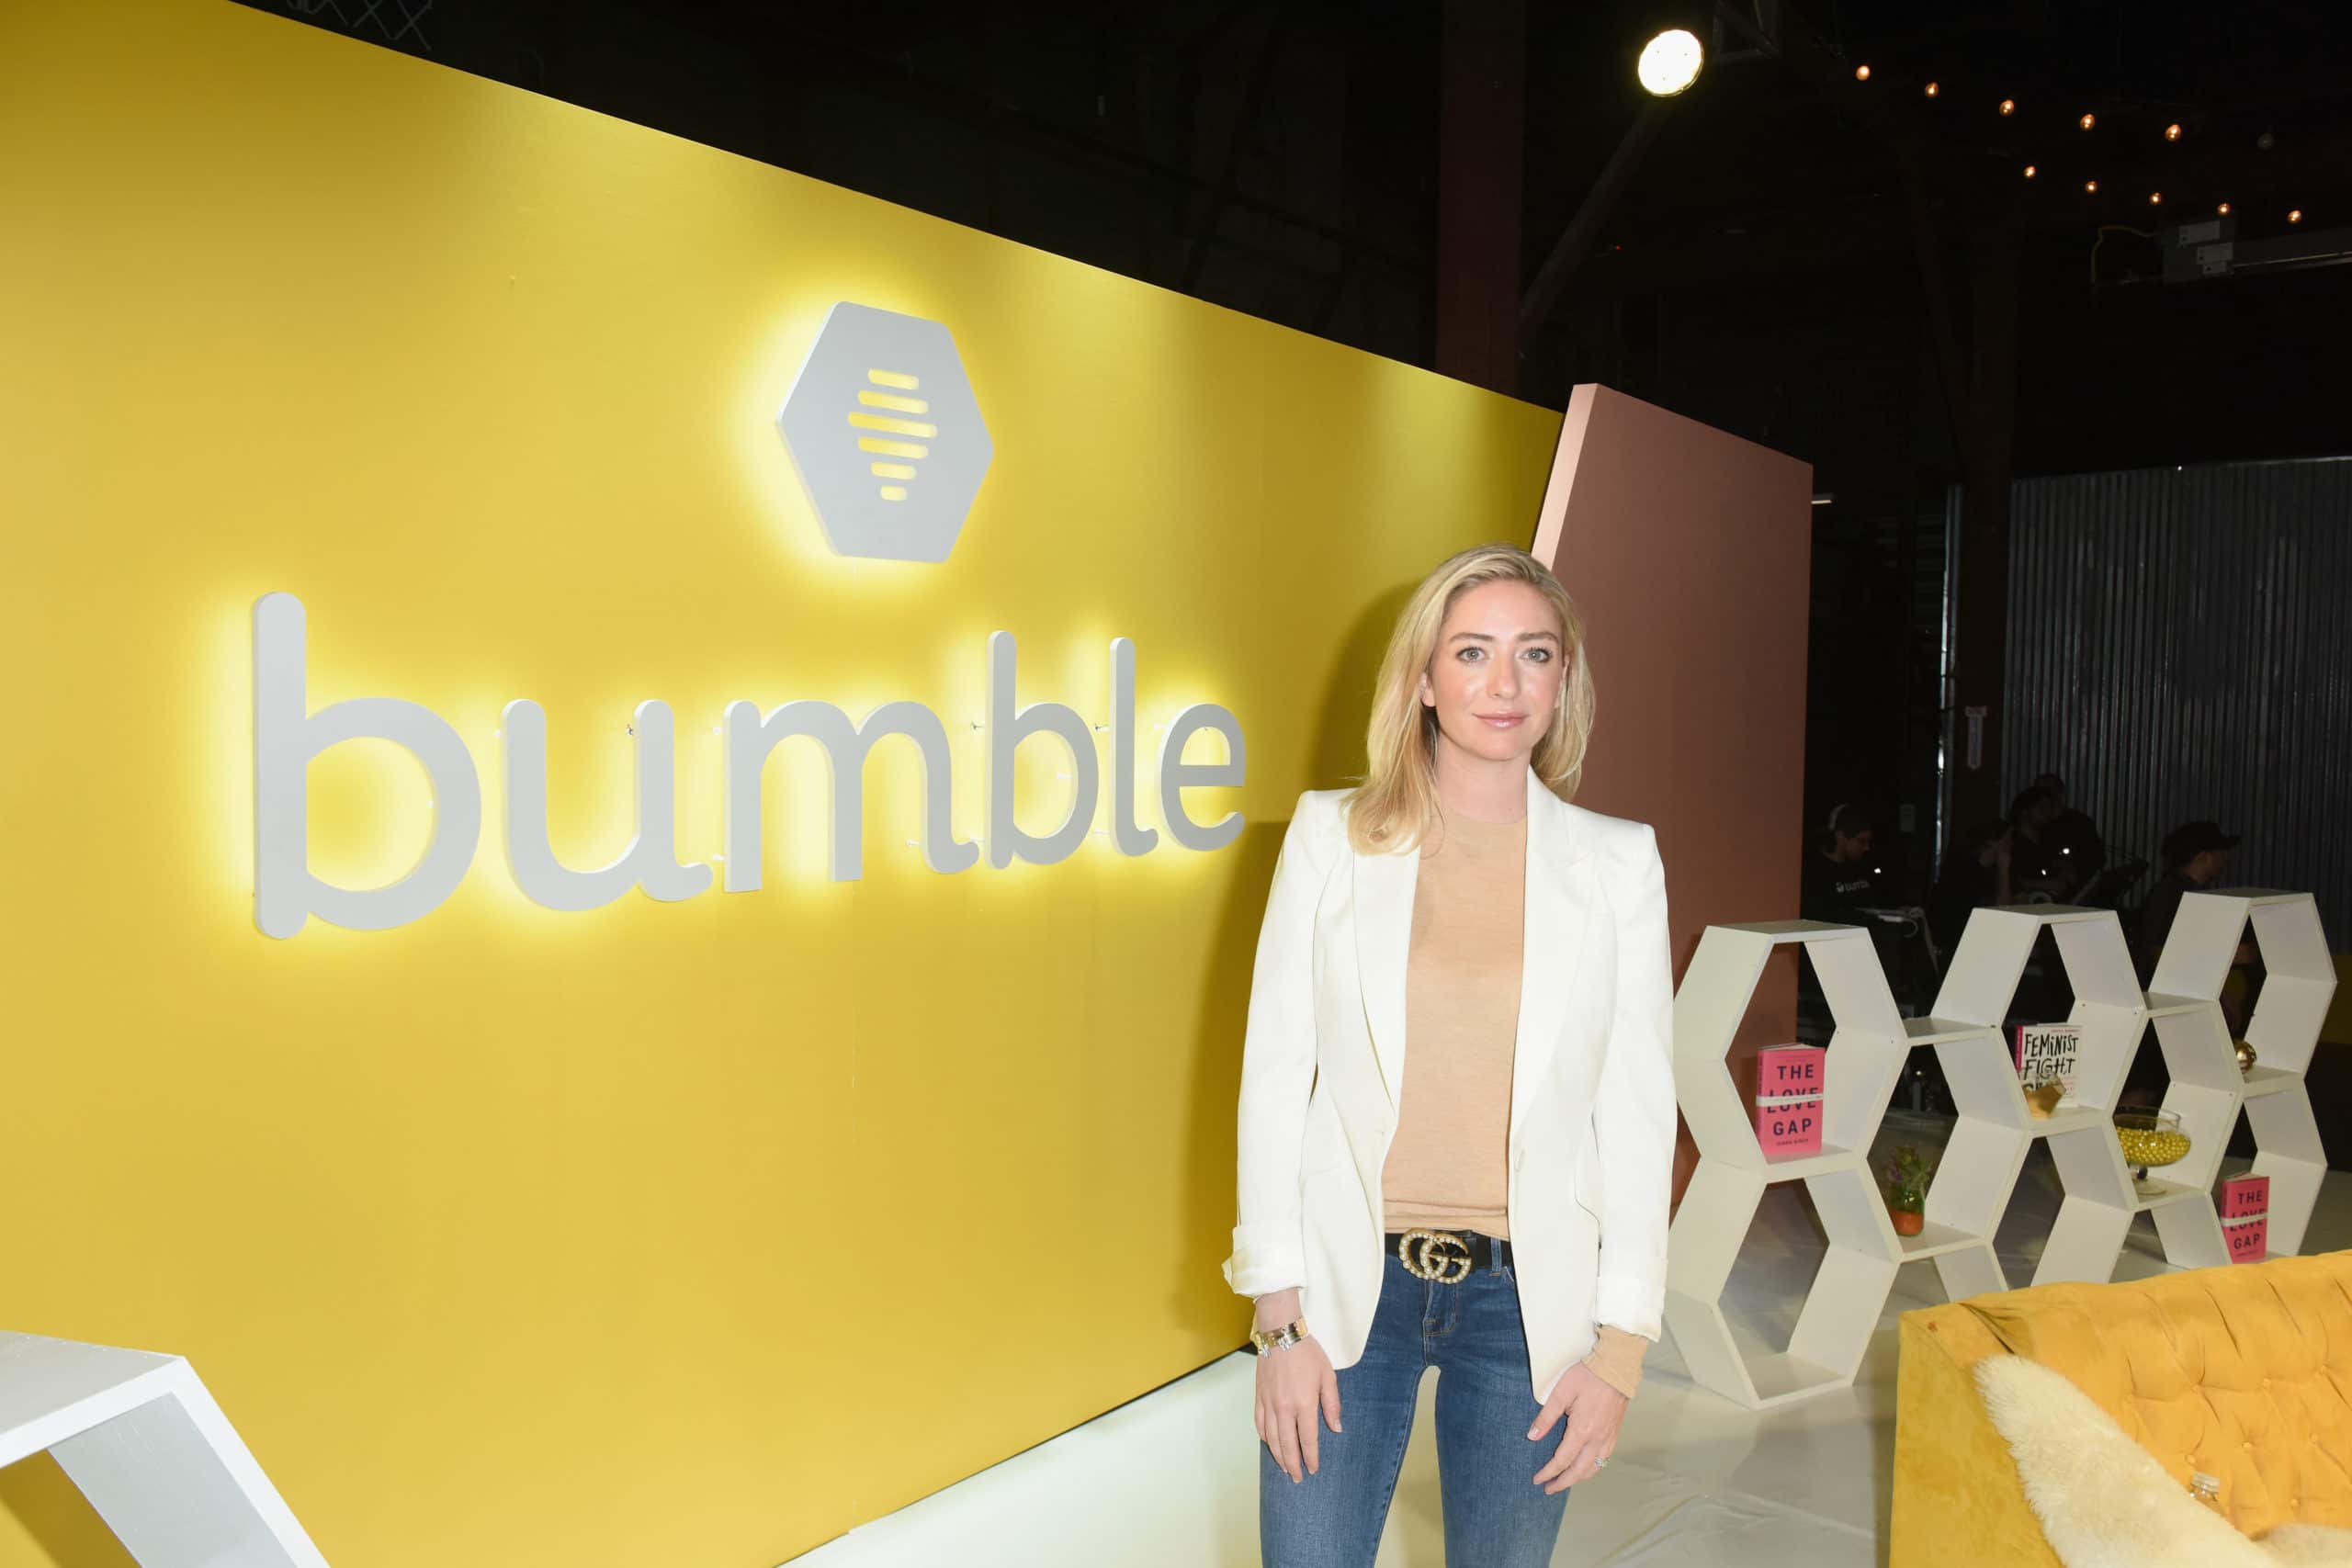 Bumble Presents: Empowering Connections